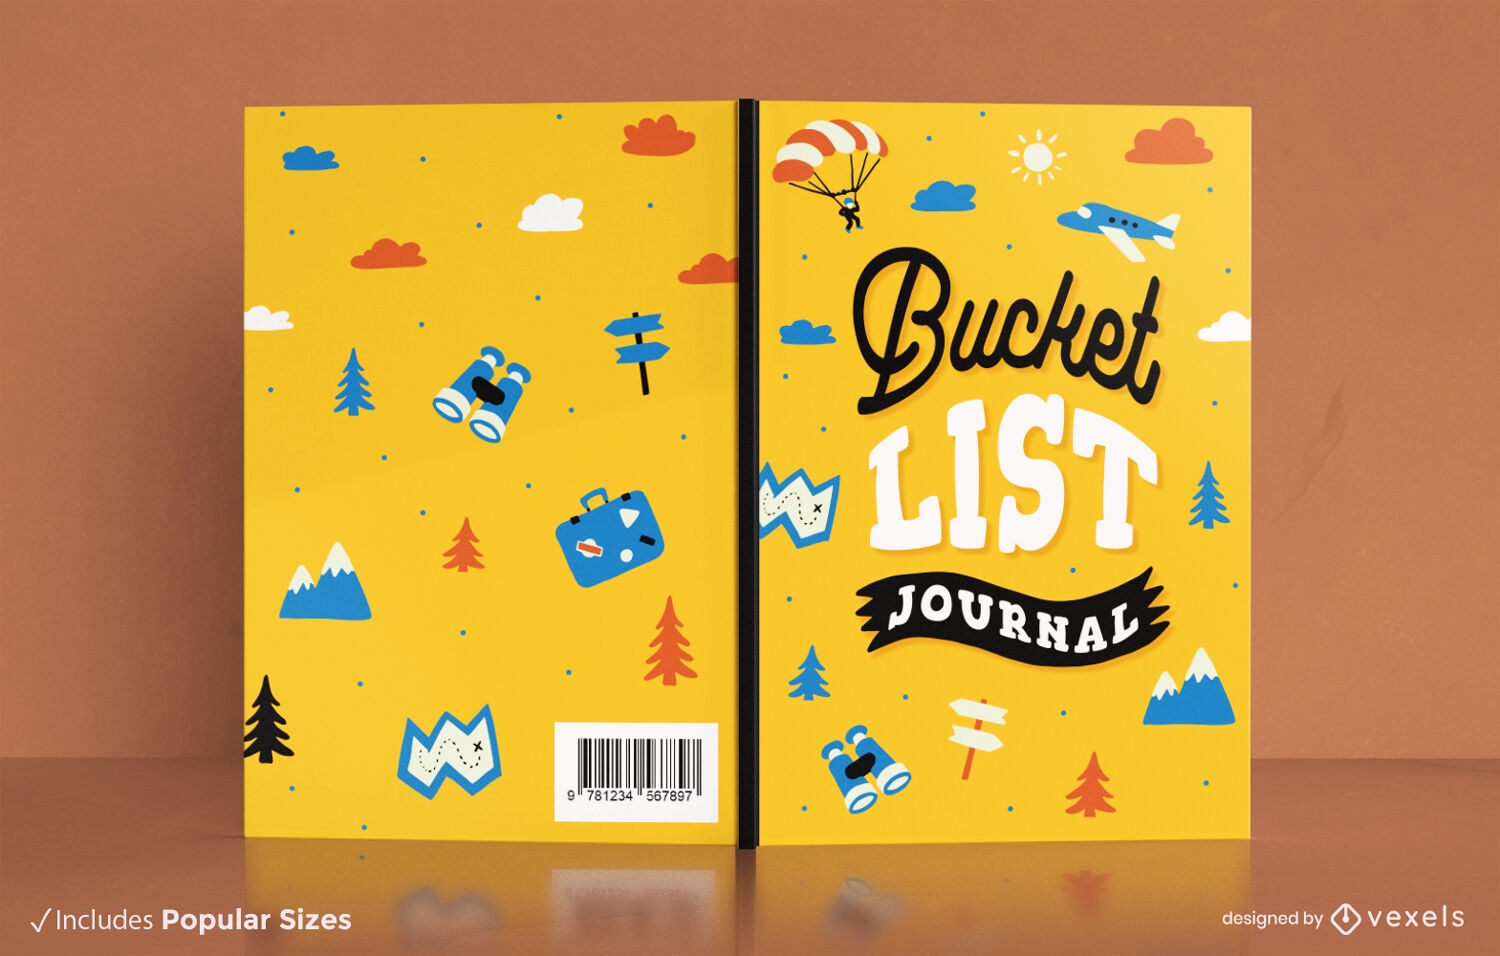 Hiking and adventure journal book cover design